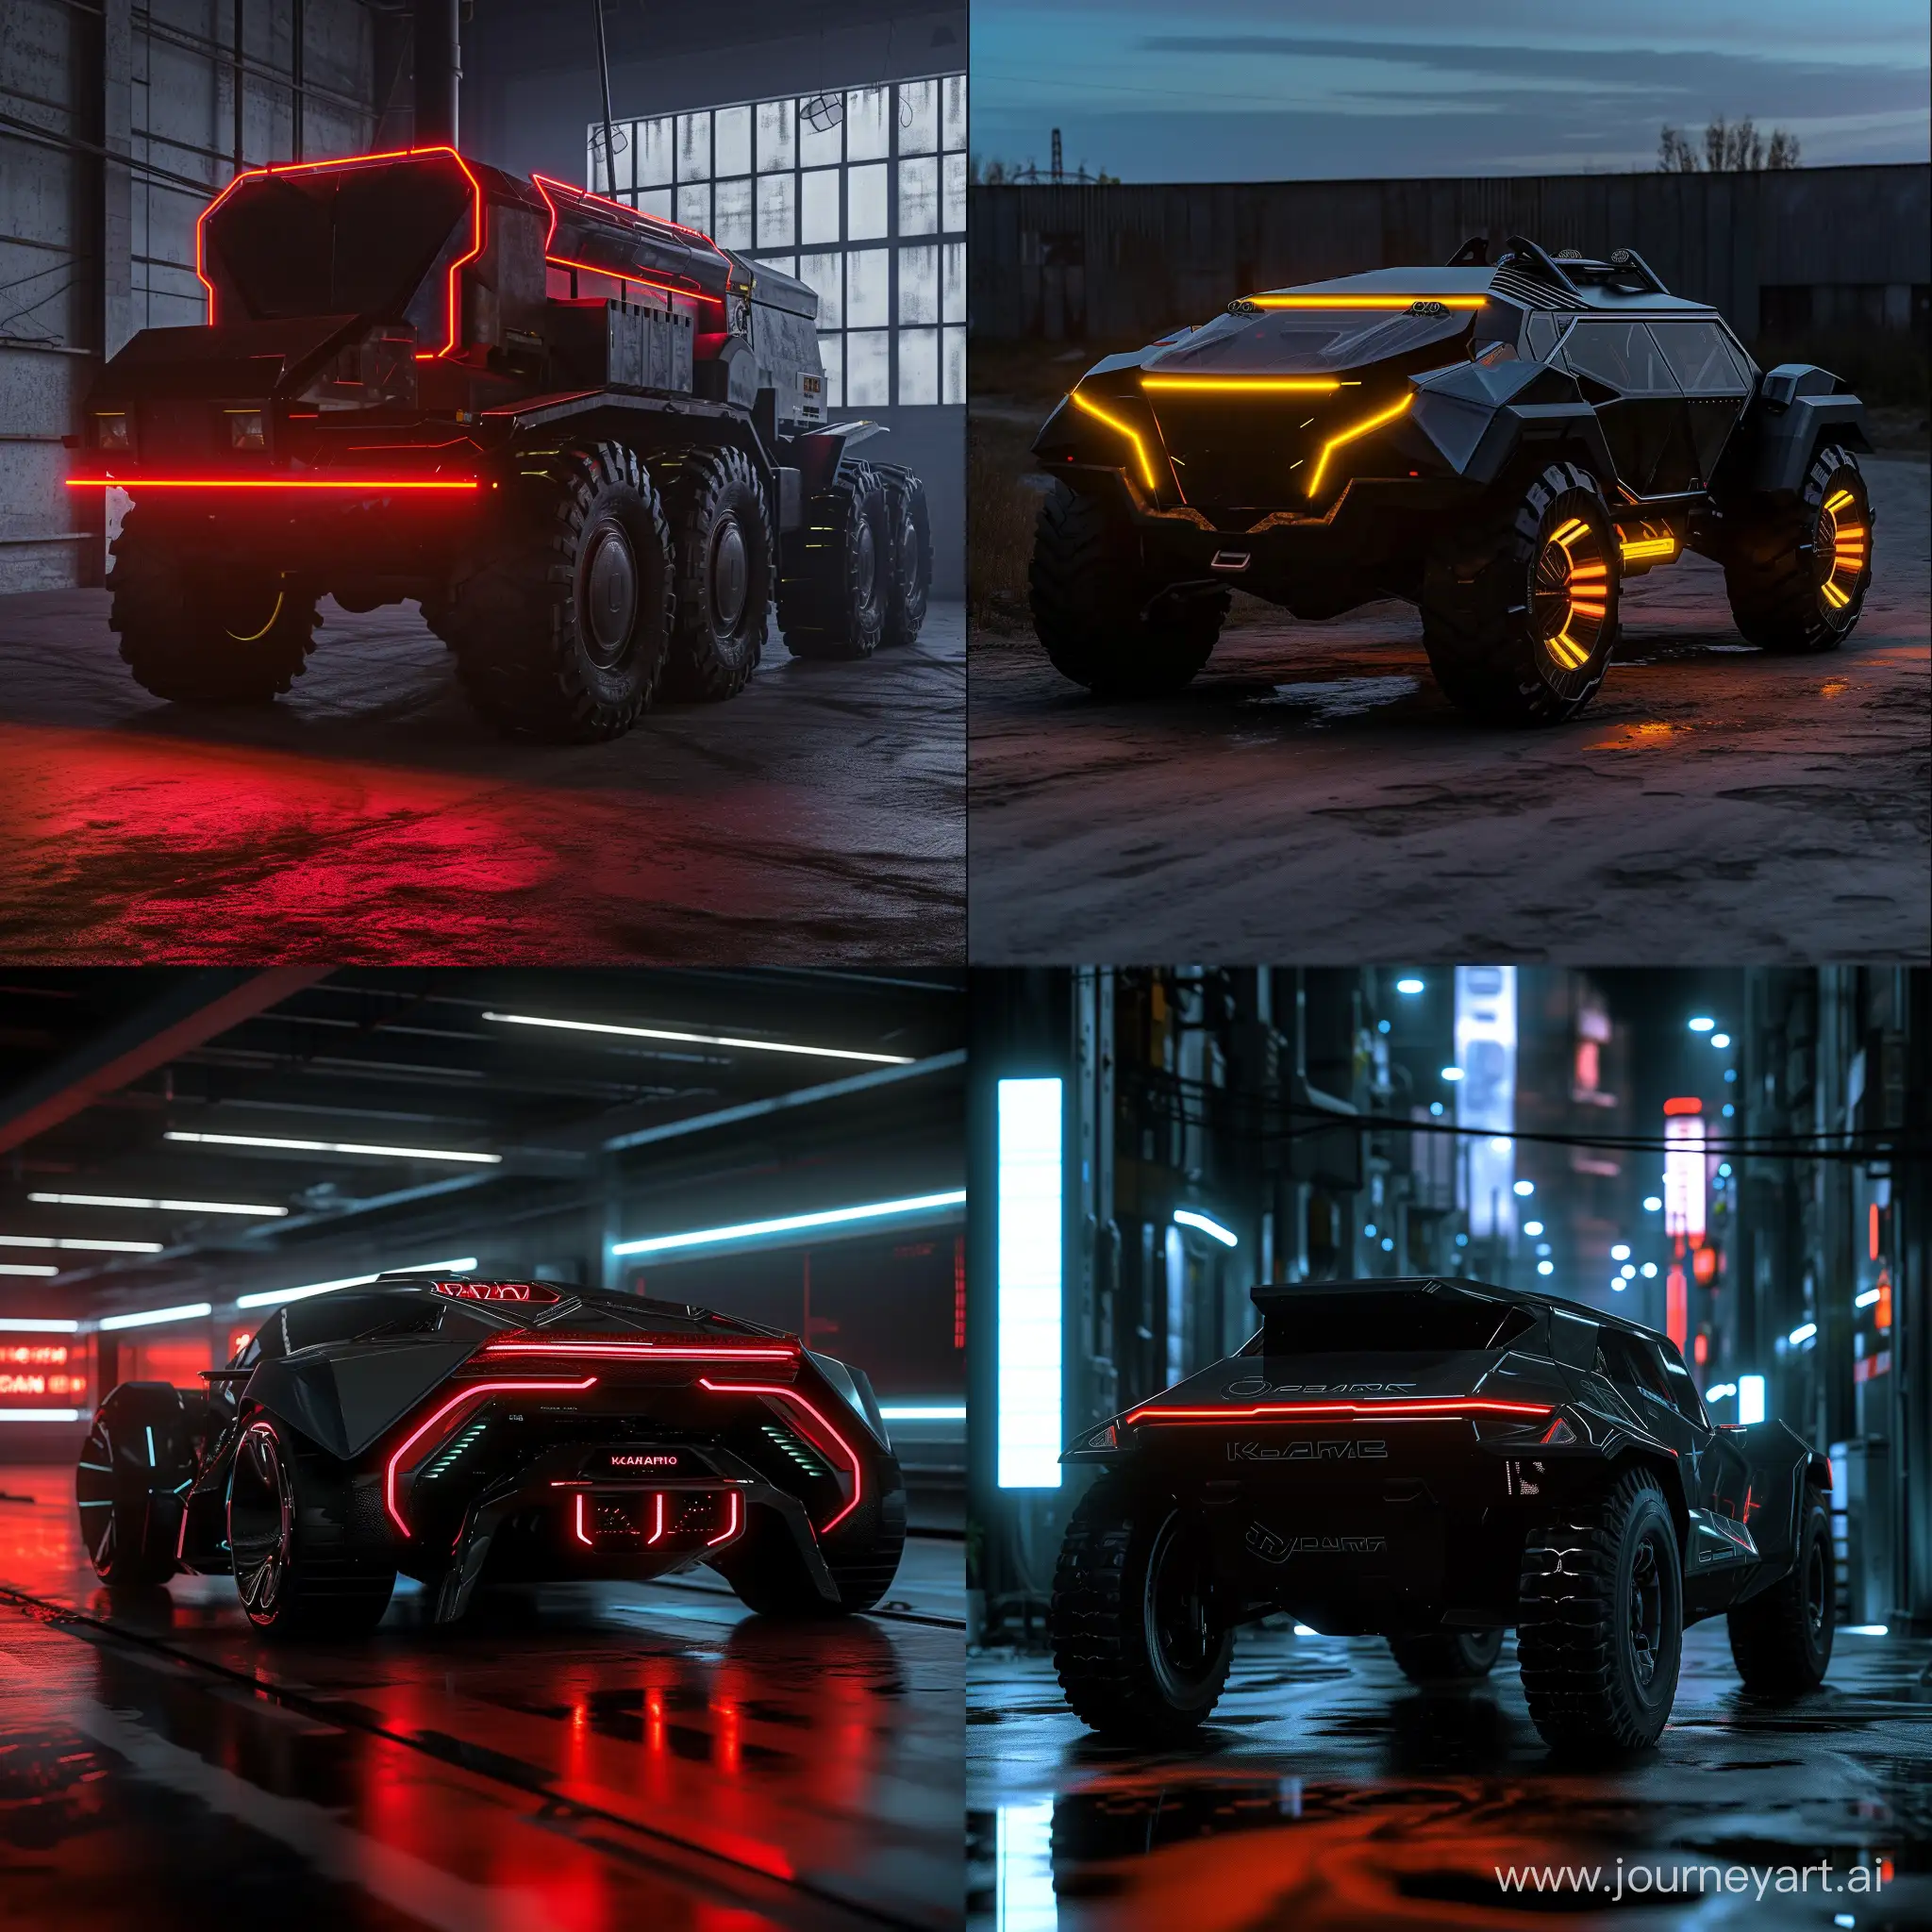 Futuristic-KAMAZ-with-OLED-Lighting-in-Cinematic-Style